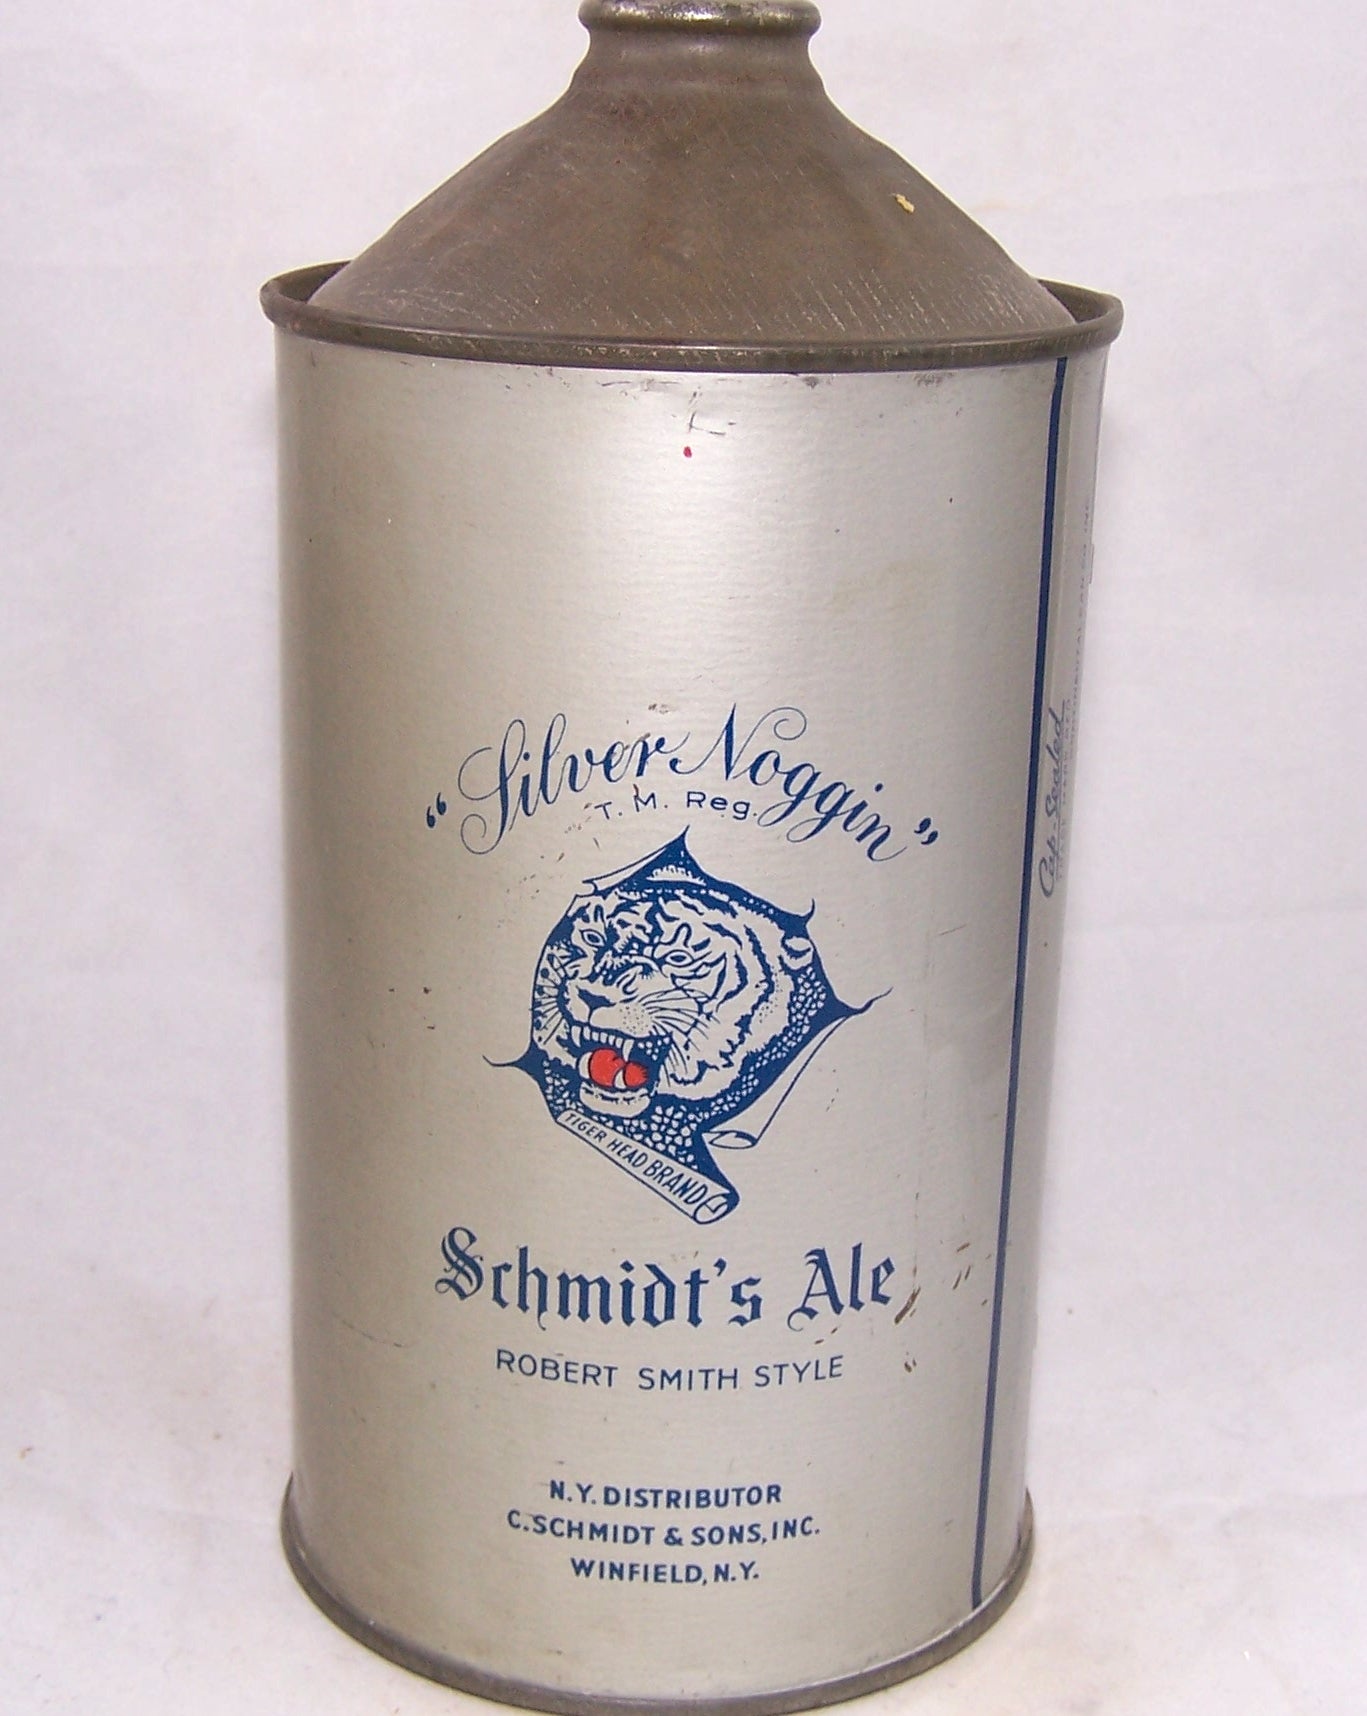 Schmidt's Tiger Cream Ale (4 Lines of Text) USBC 219-01, Grade 1/1+ Sold on 10/22/17